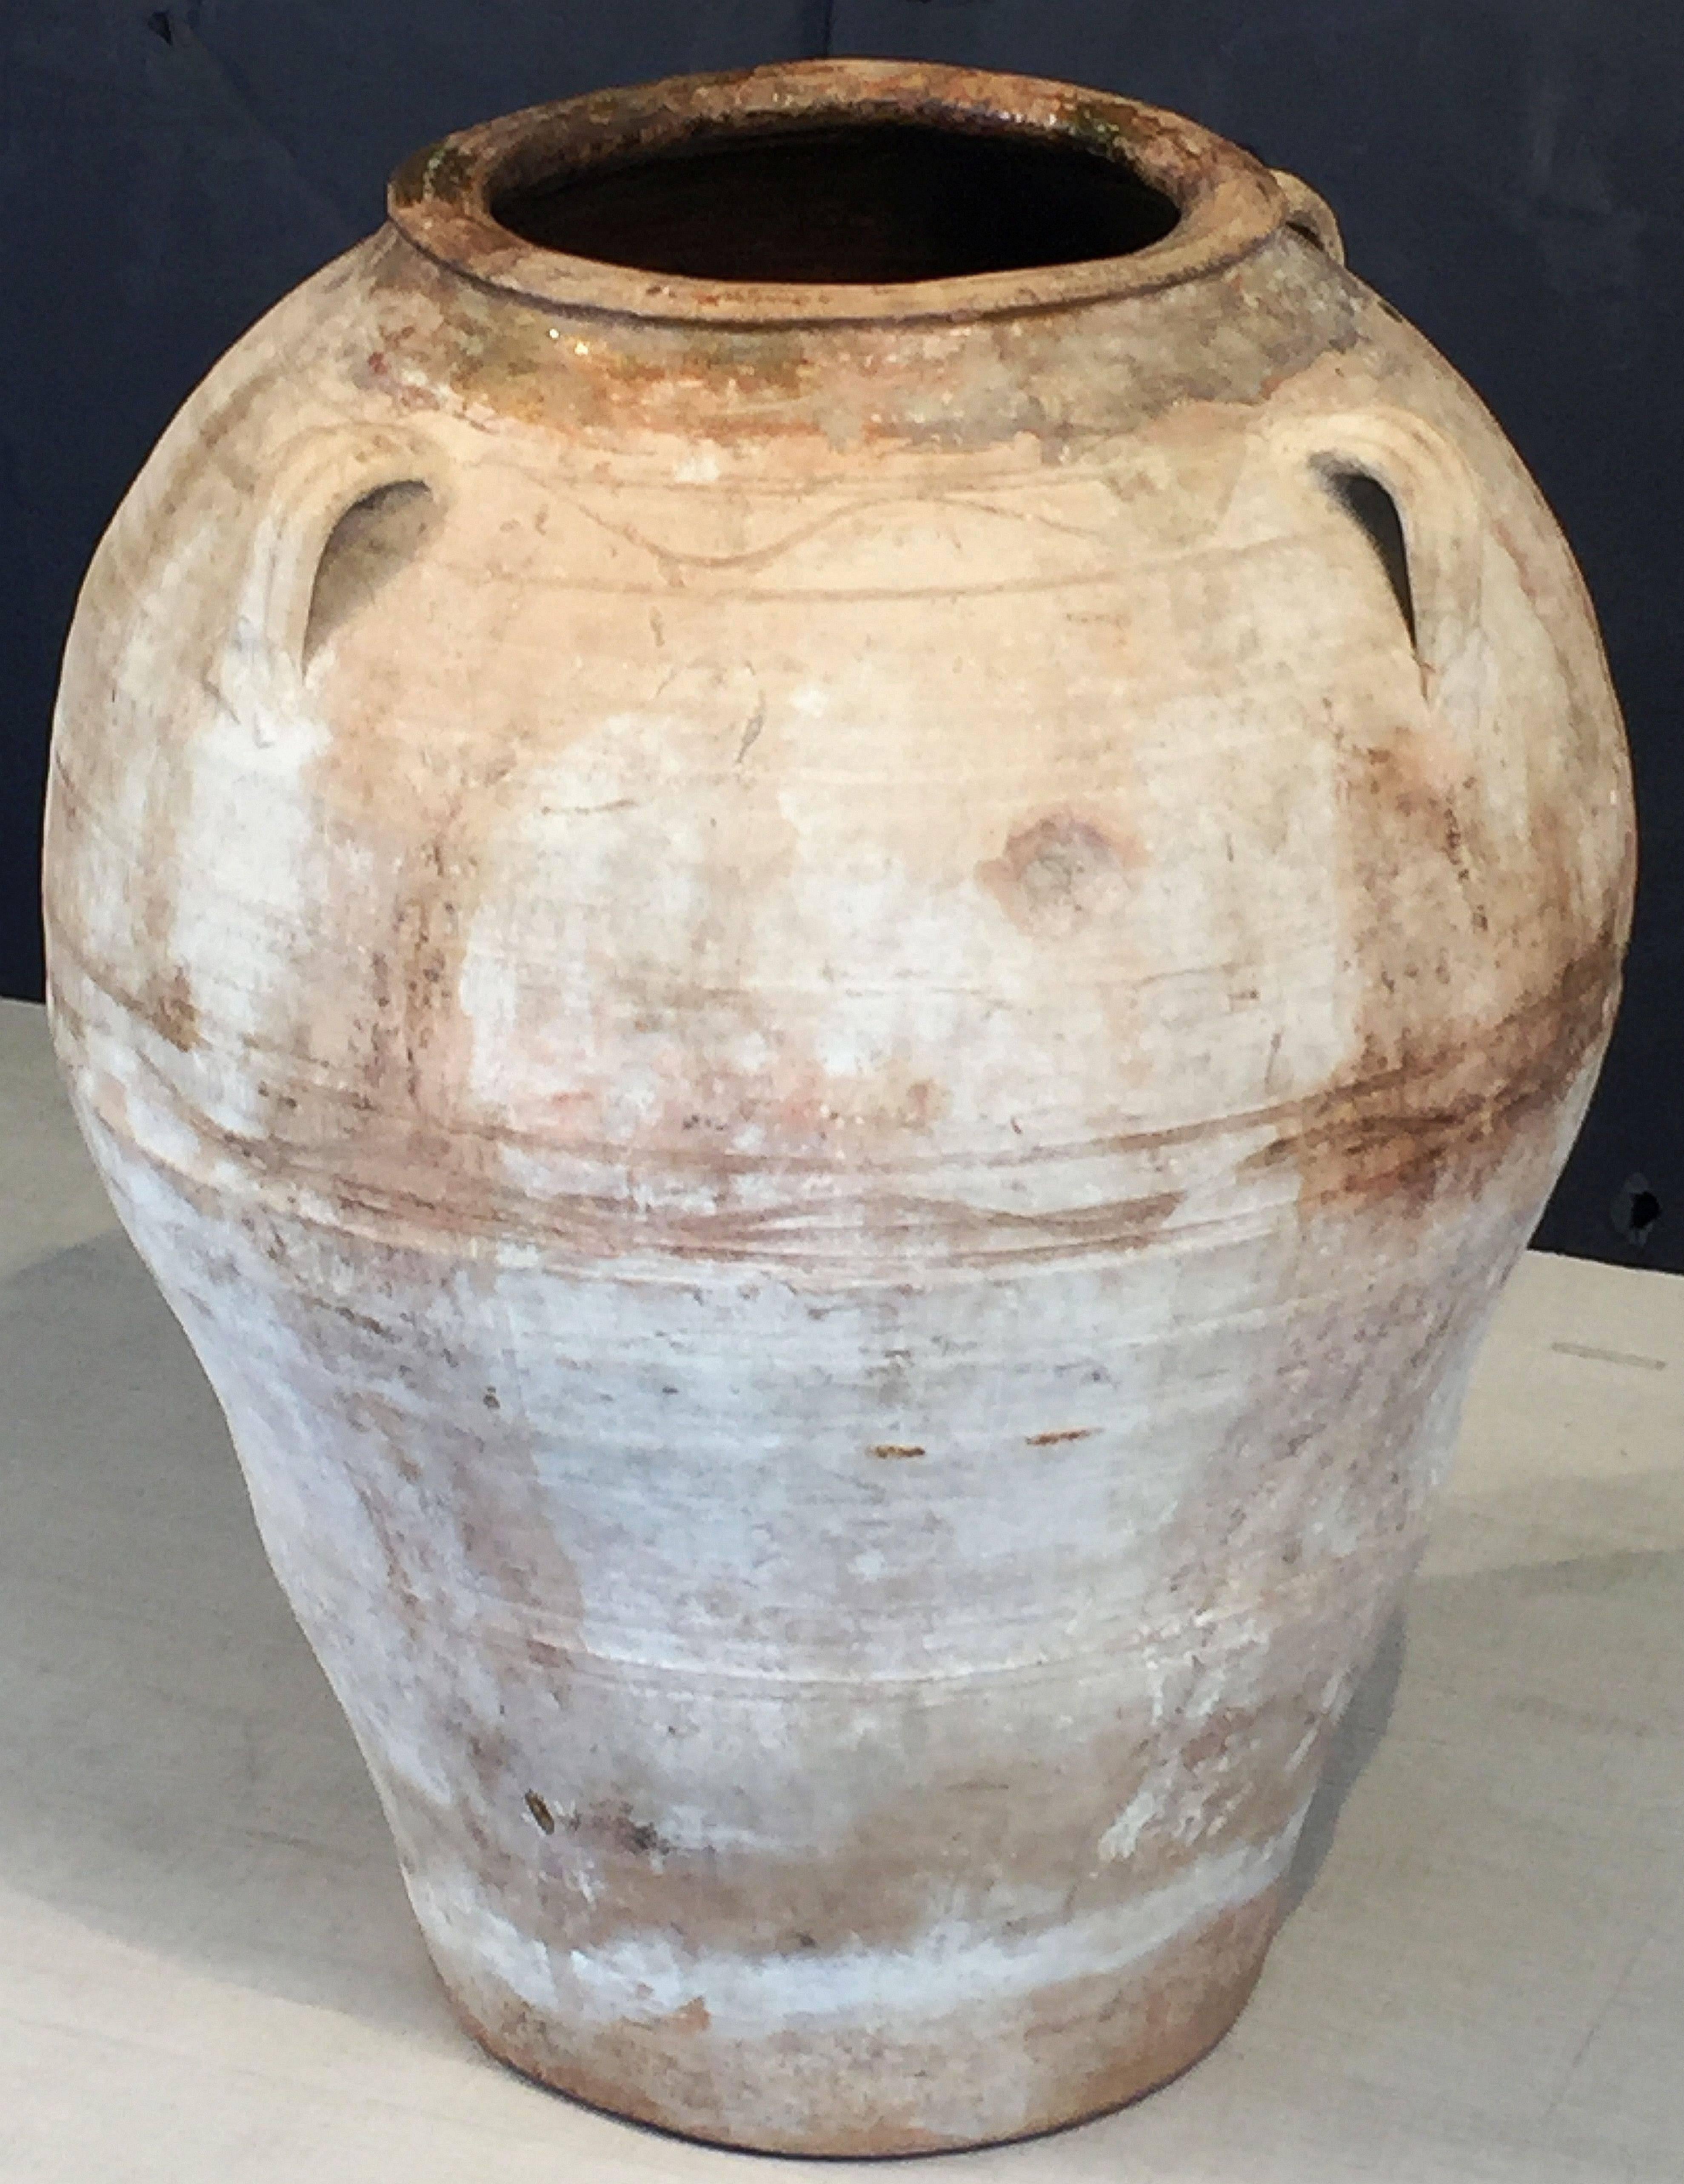 A handsome large Spanish garden pot or oil jar, featuring a glazed rolled-edge top over a cylindrical body with four handles, and functional as a garden ornament, fountain, or planter.

Other similarly-styled pots available in a variety of sizes -